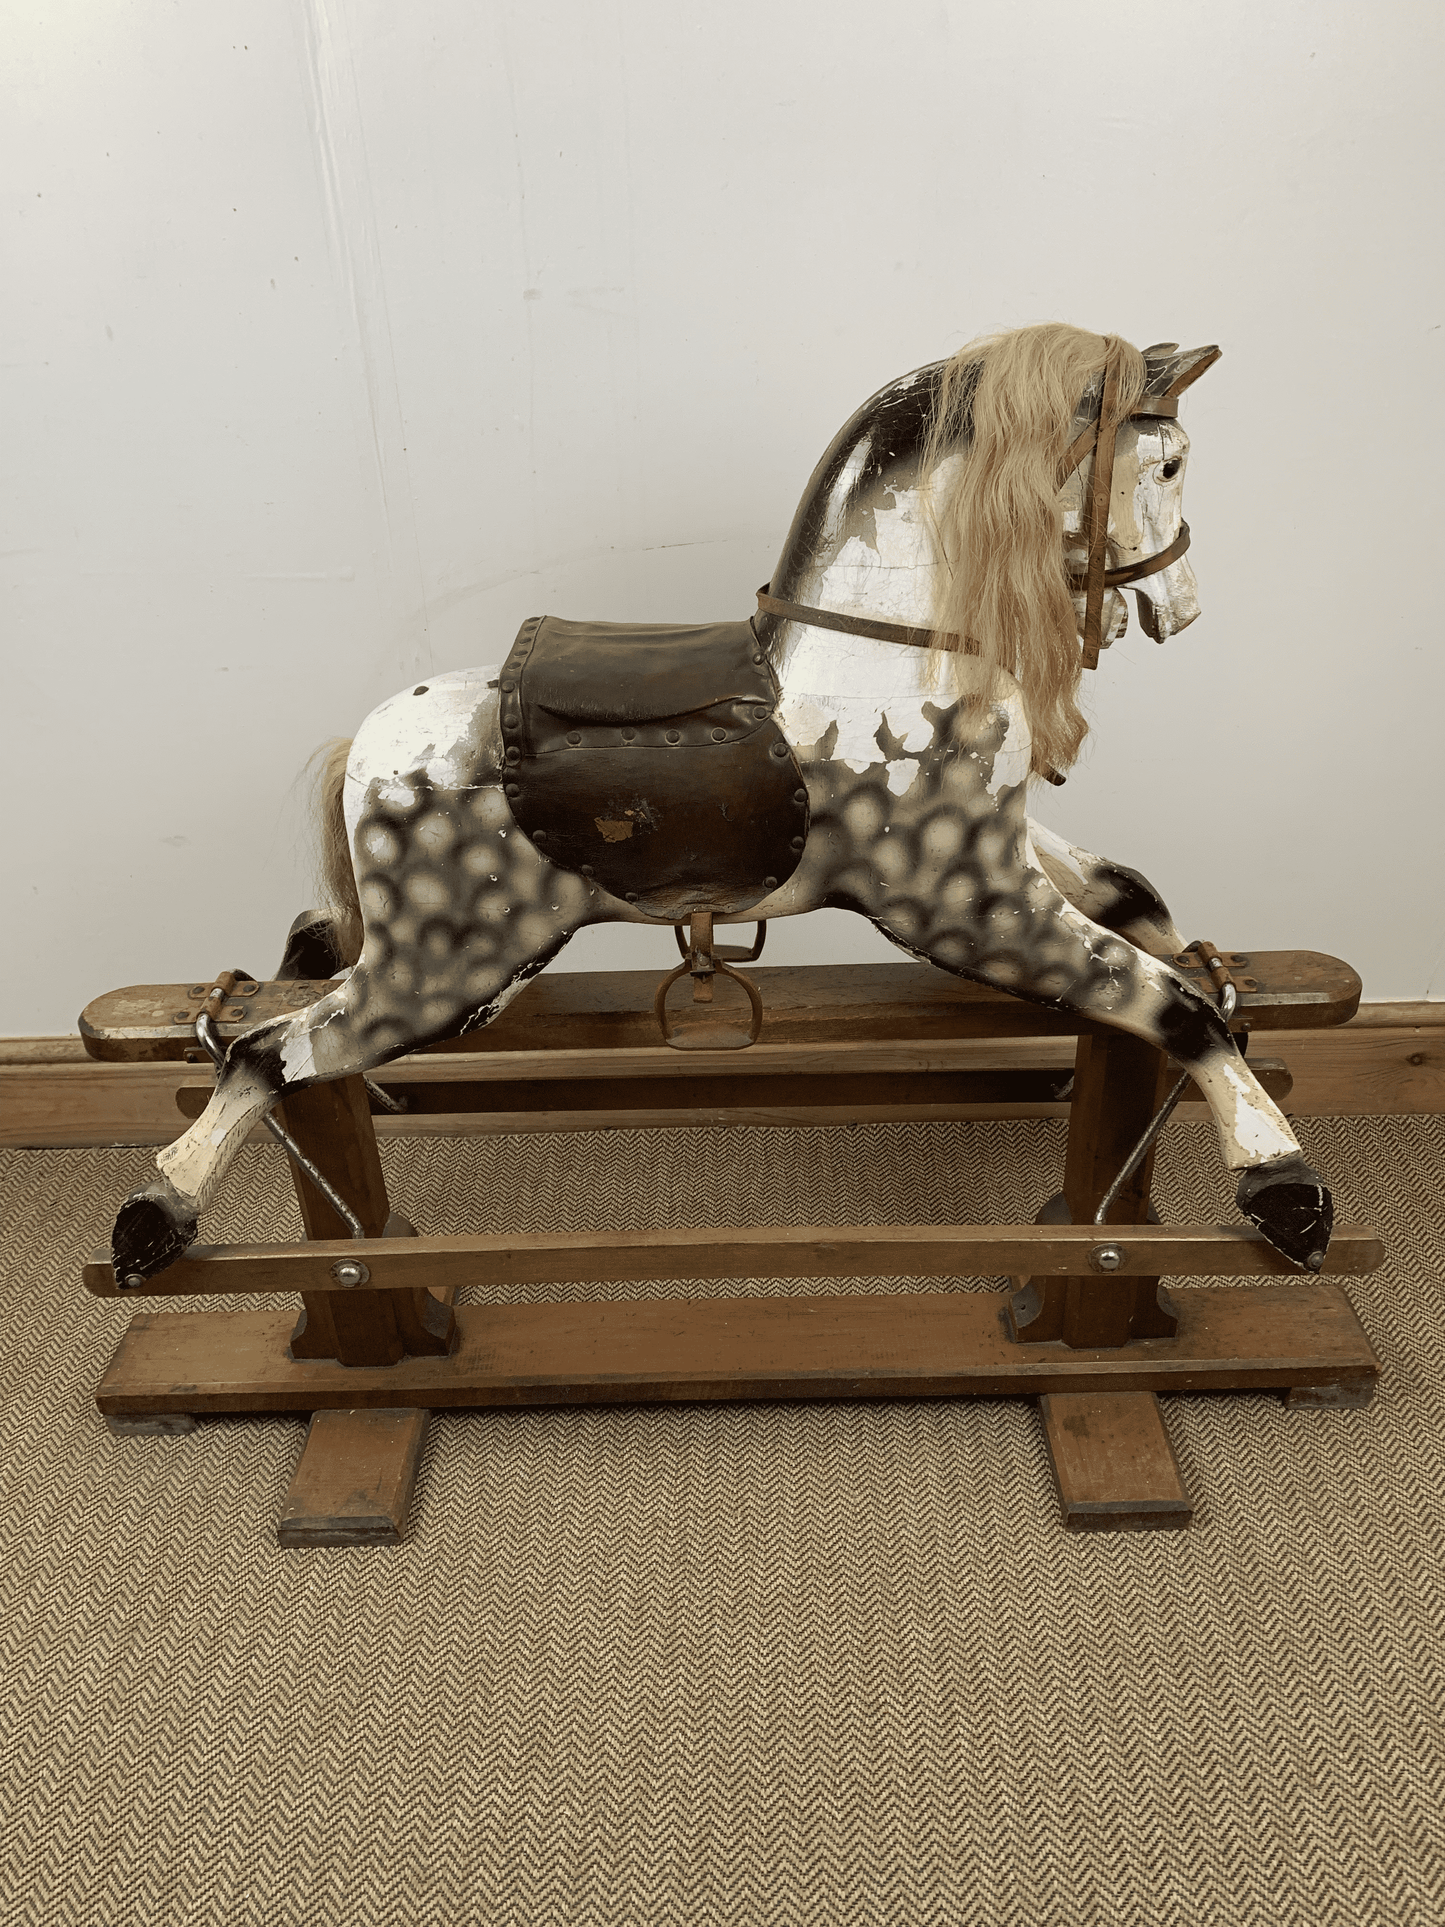 1940s Leeway Rocking Horse: Nostalgic Delight for Children and Collectors